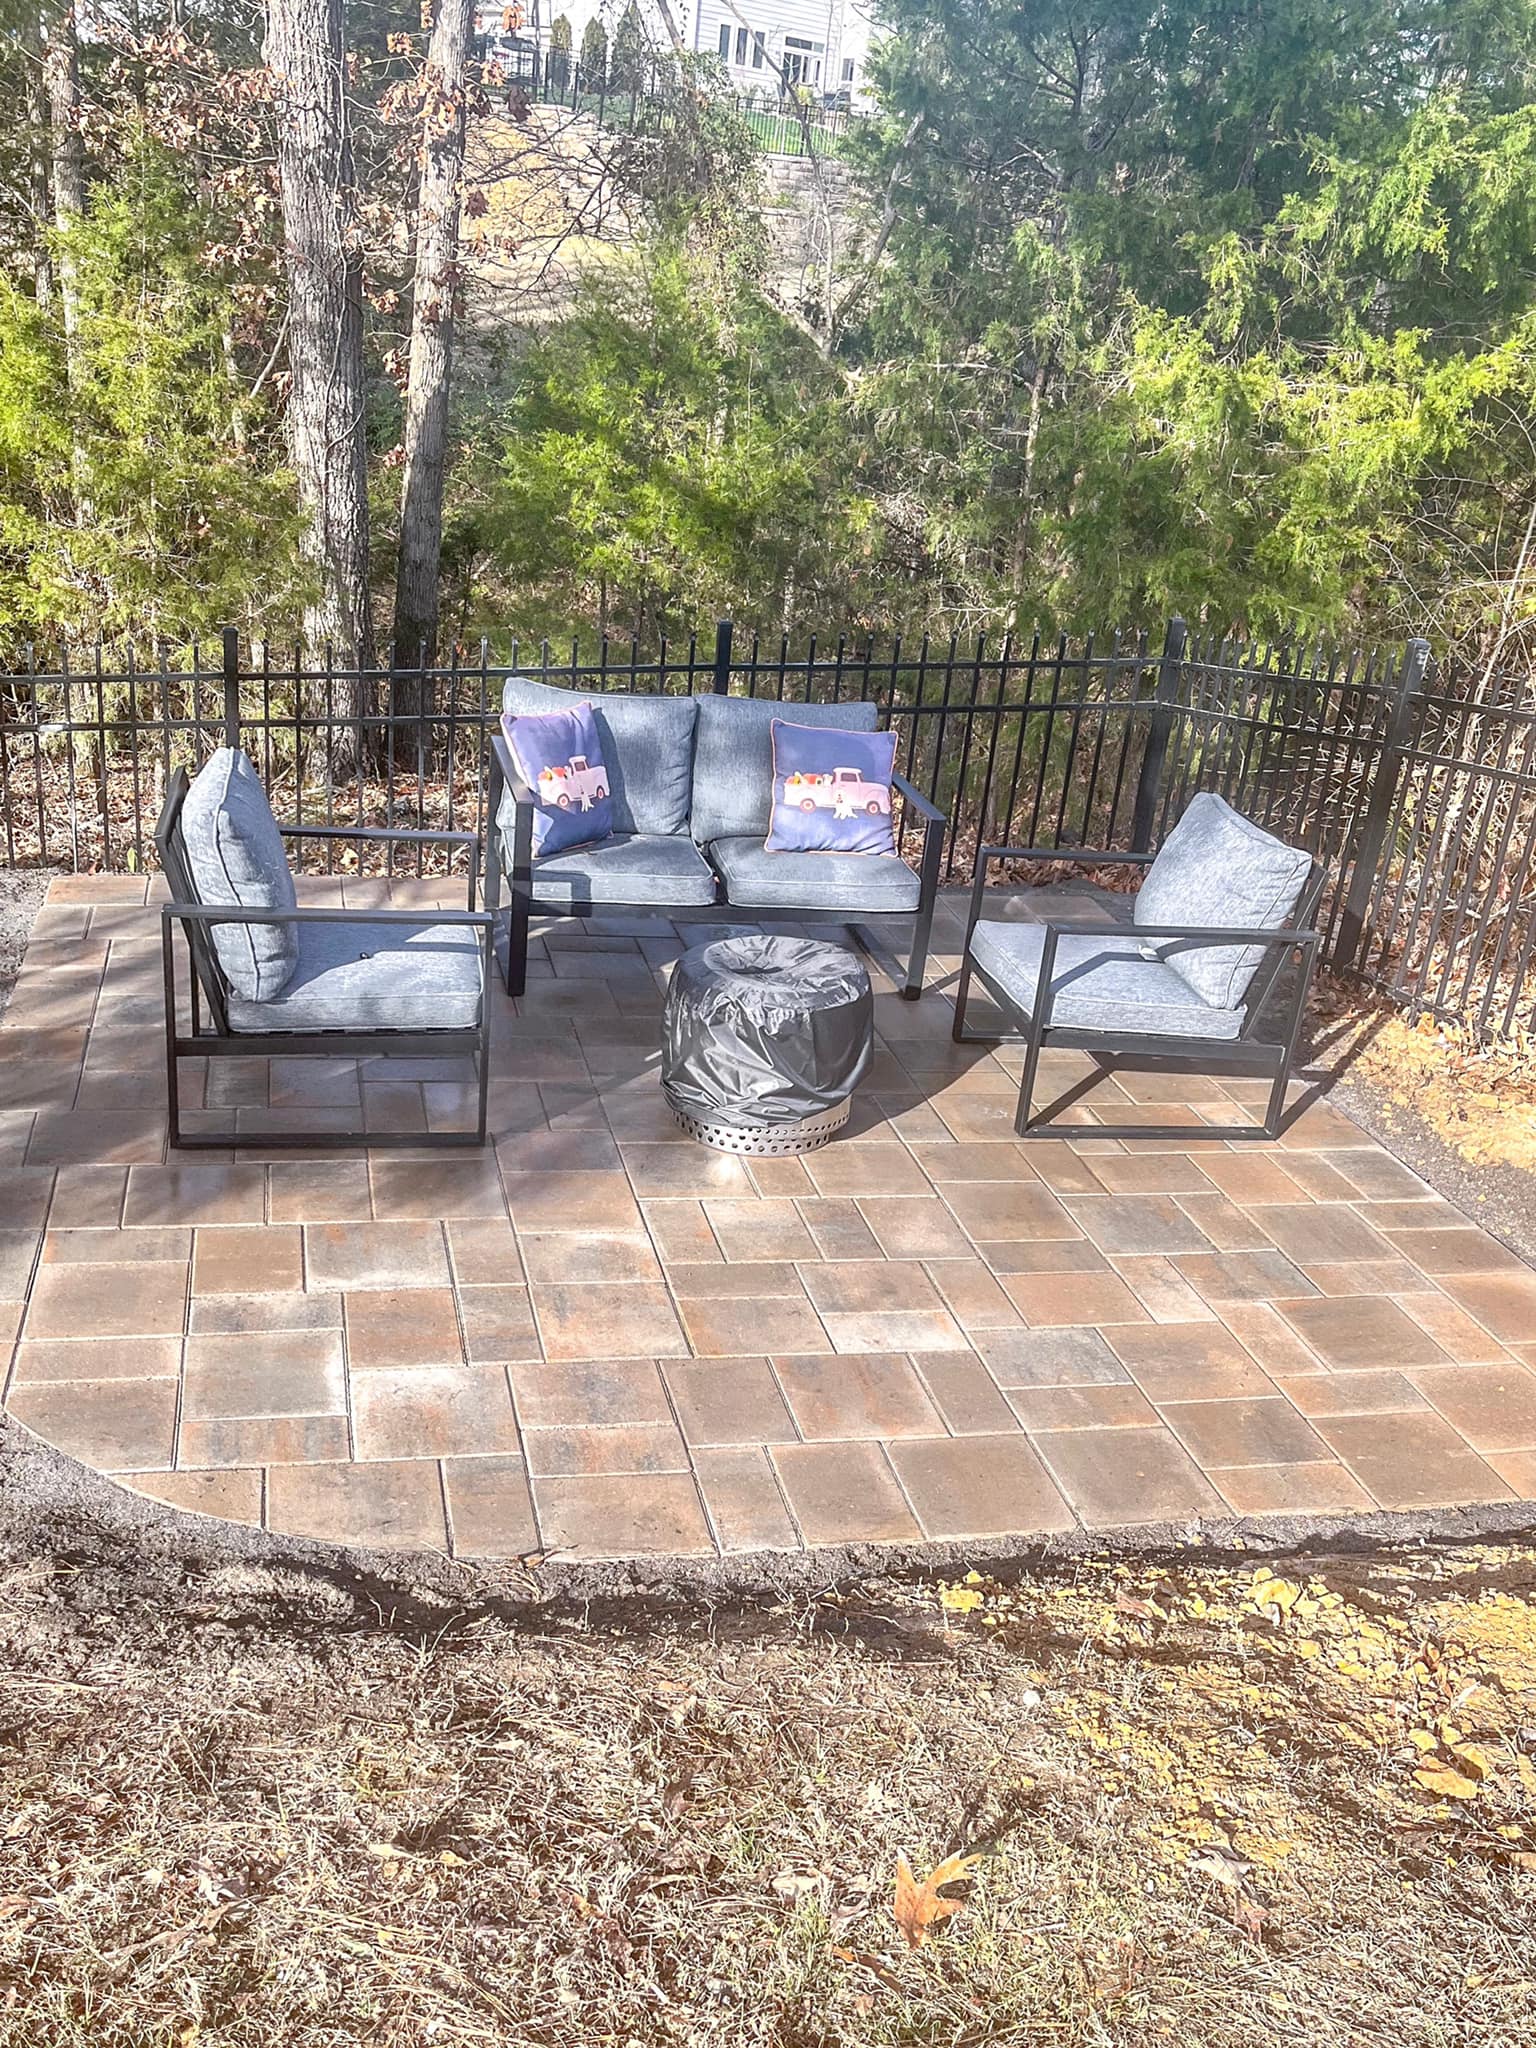 Belgard Summit Catalina Grana Paver Patio – Outdoor Living Tip of the Day